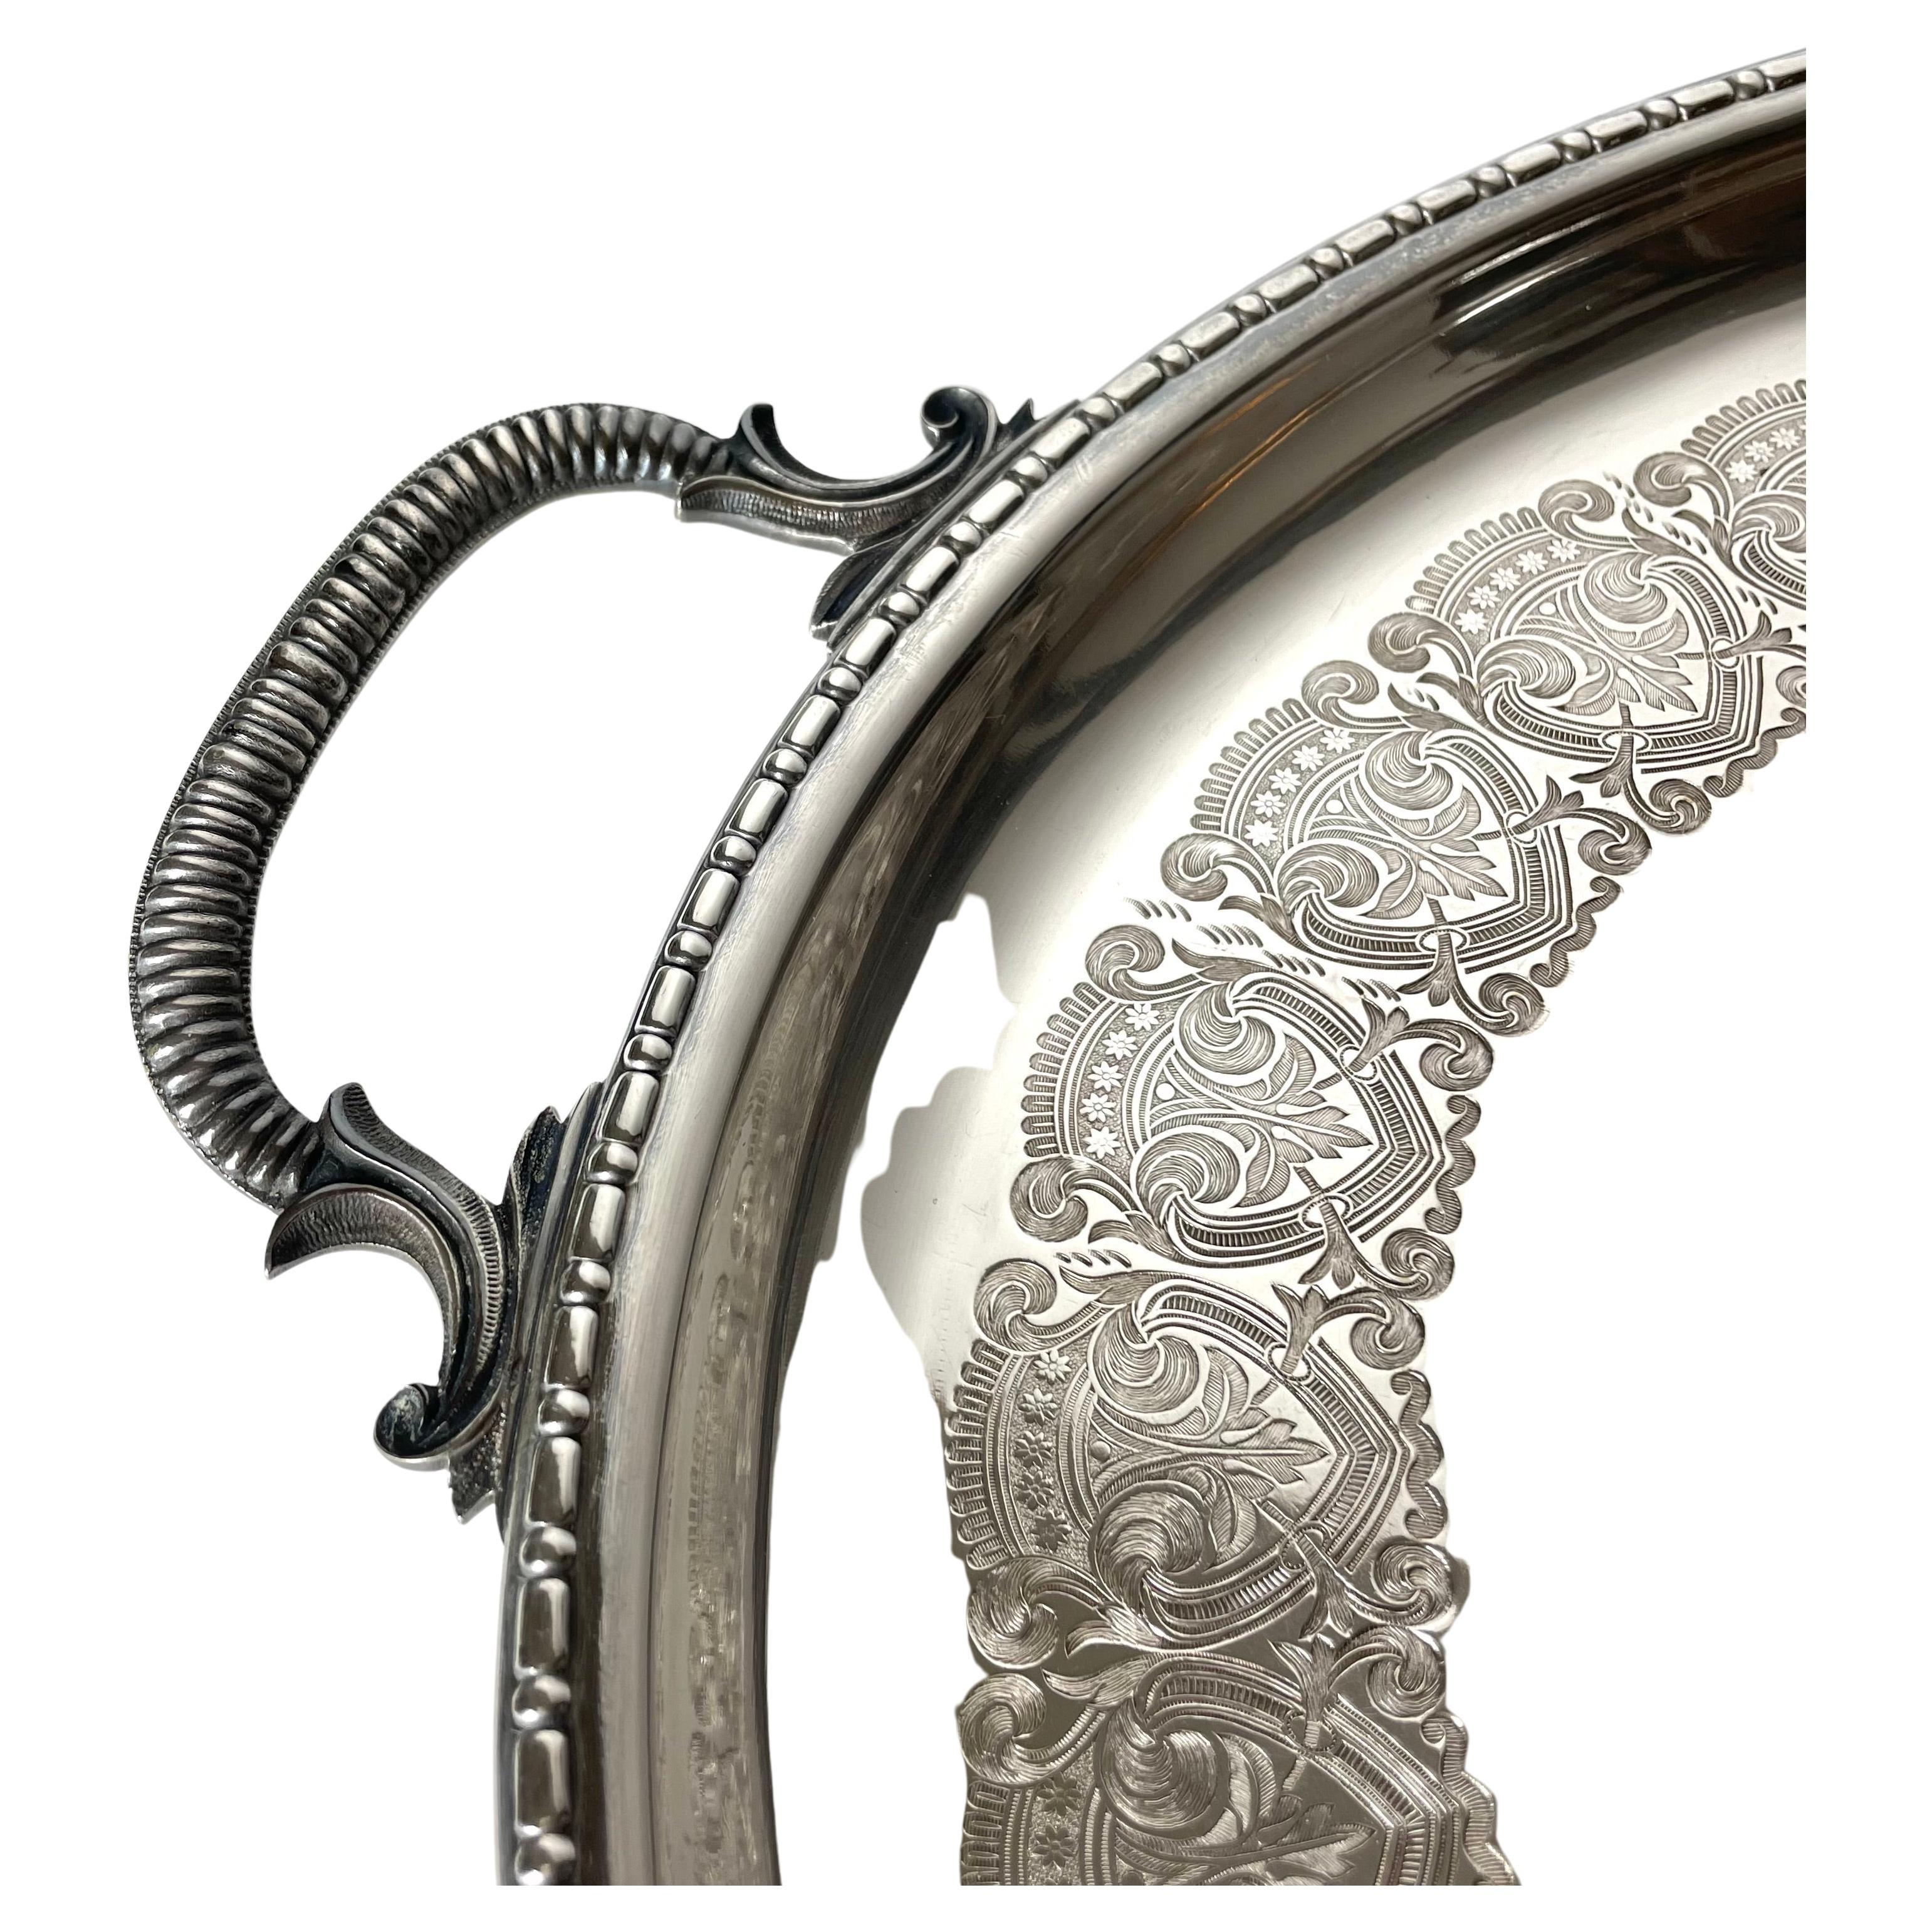 Elegant Silver-Plated Tray from the late 19th Century